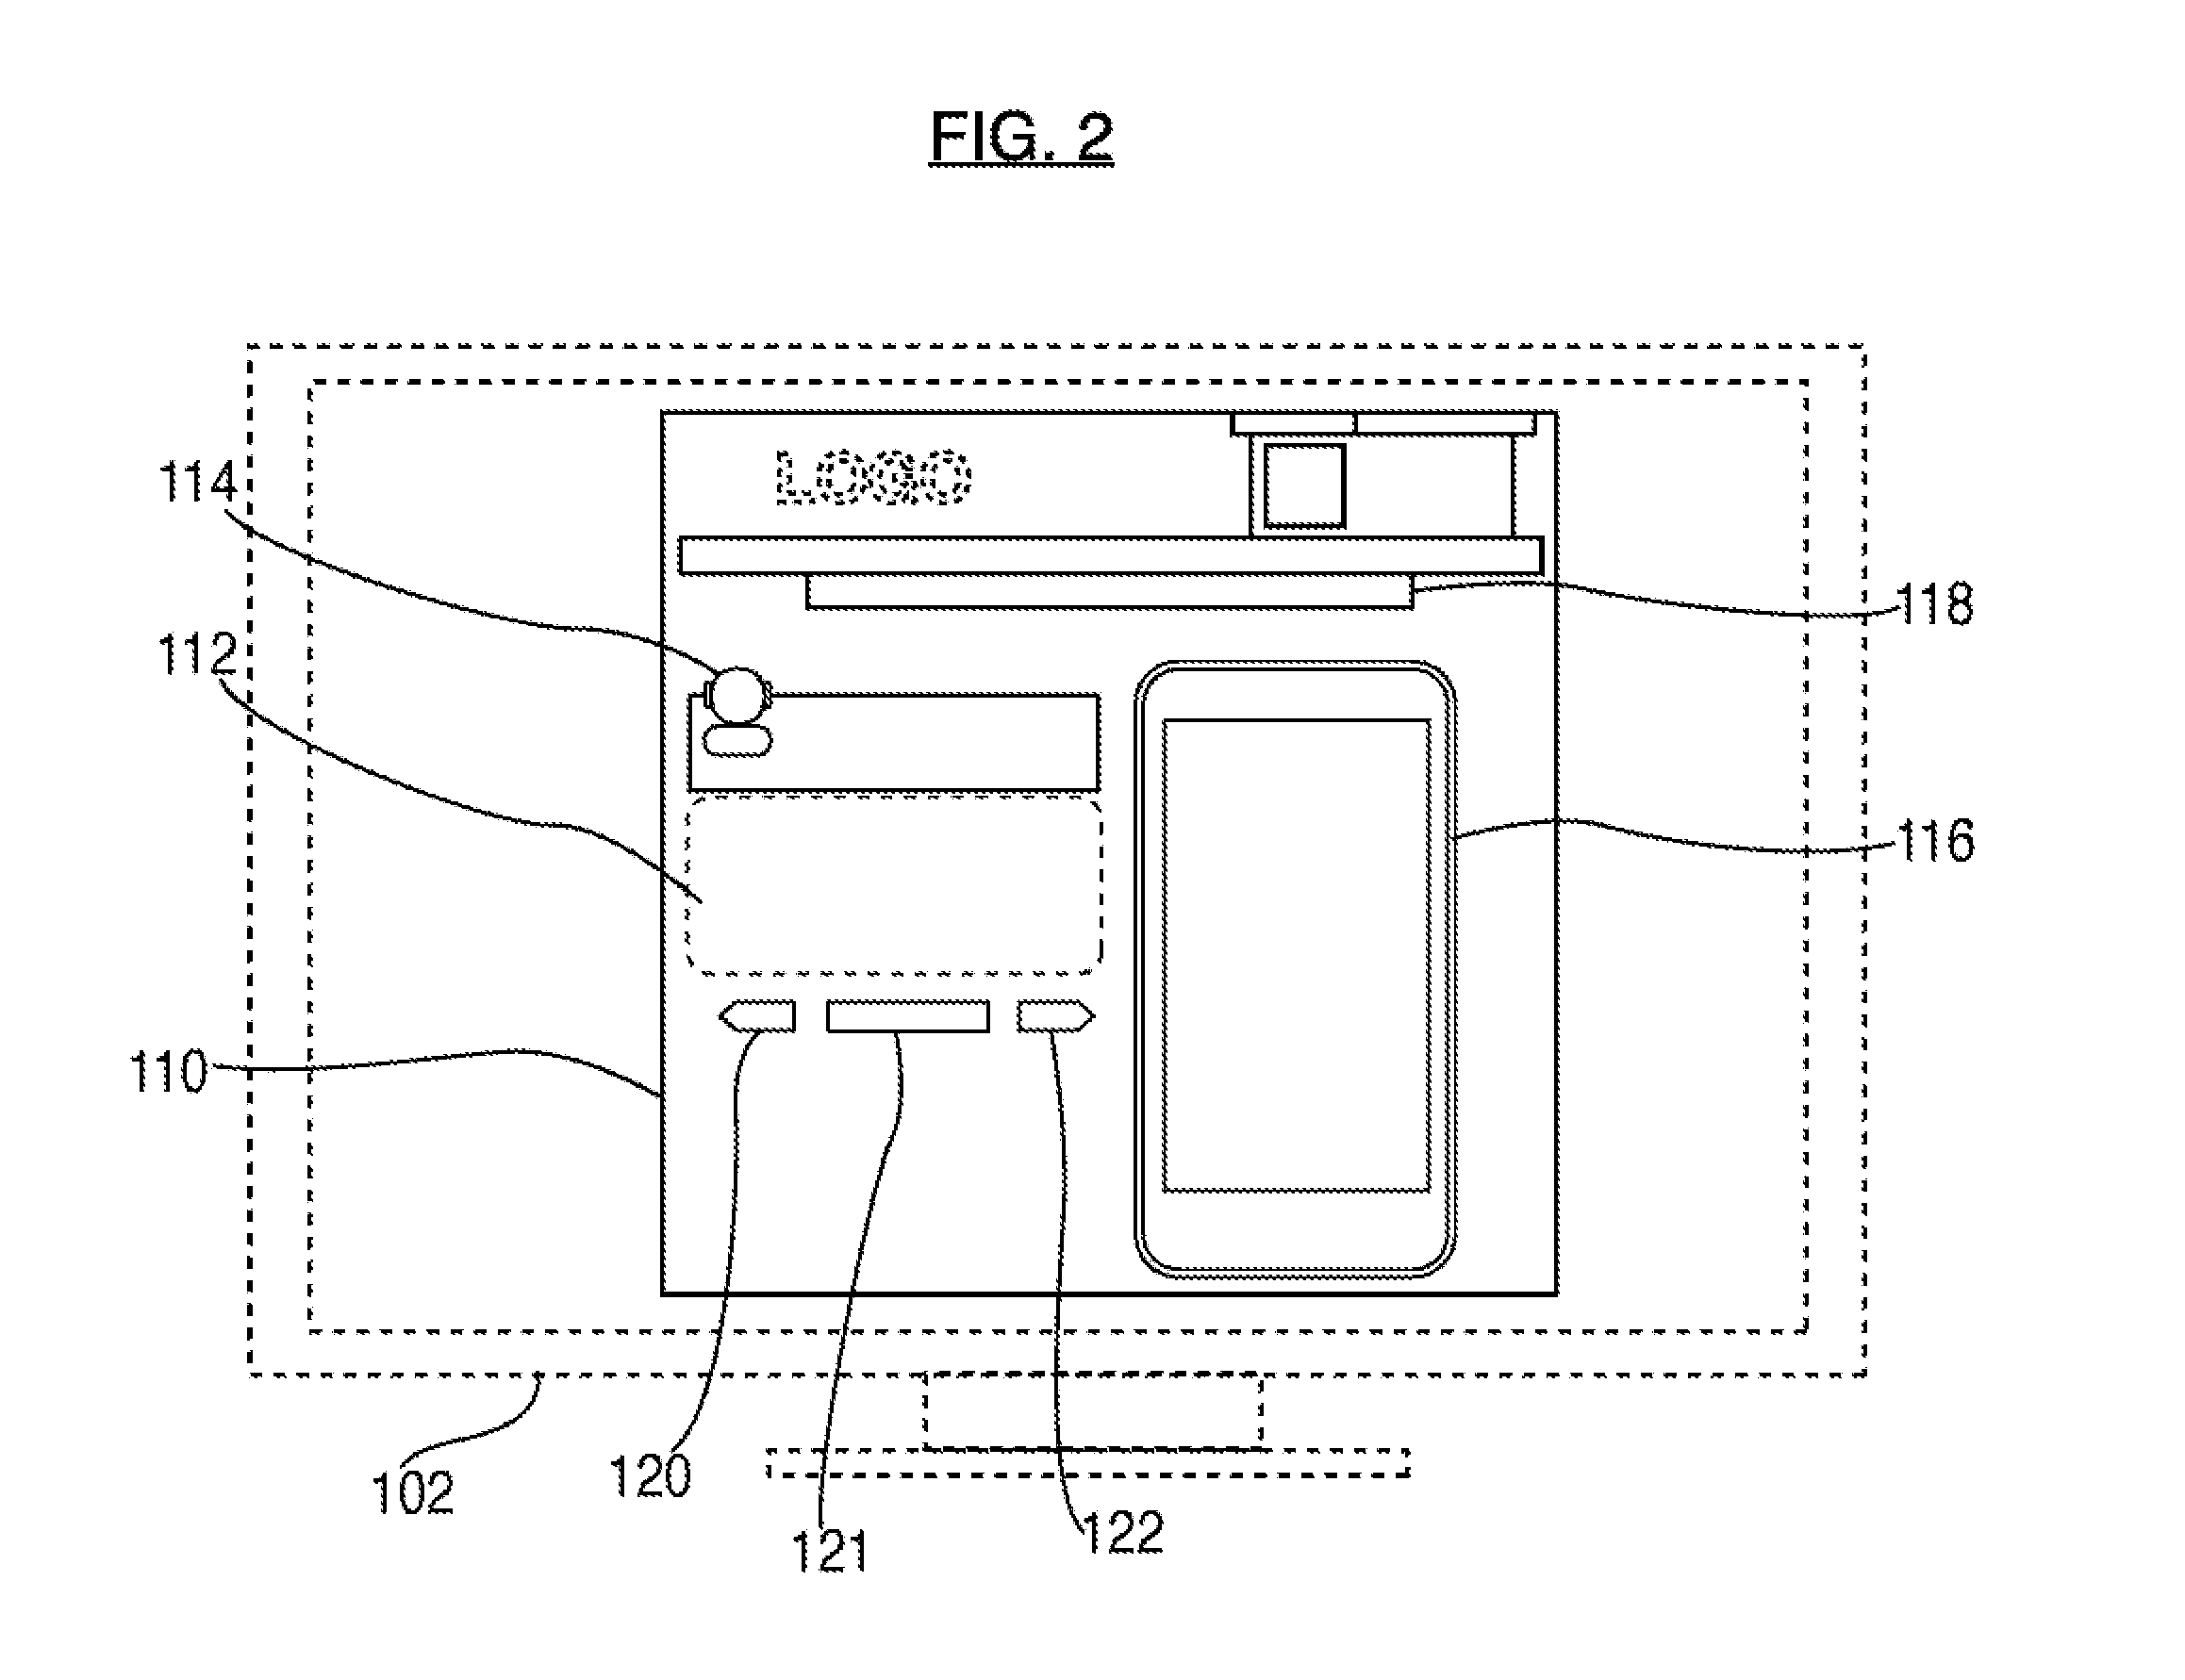 Systems and methods for a specialized application development and deployment platform